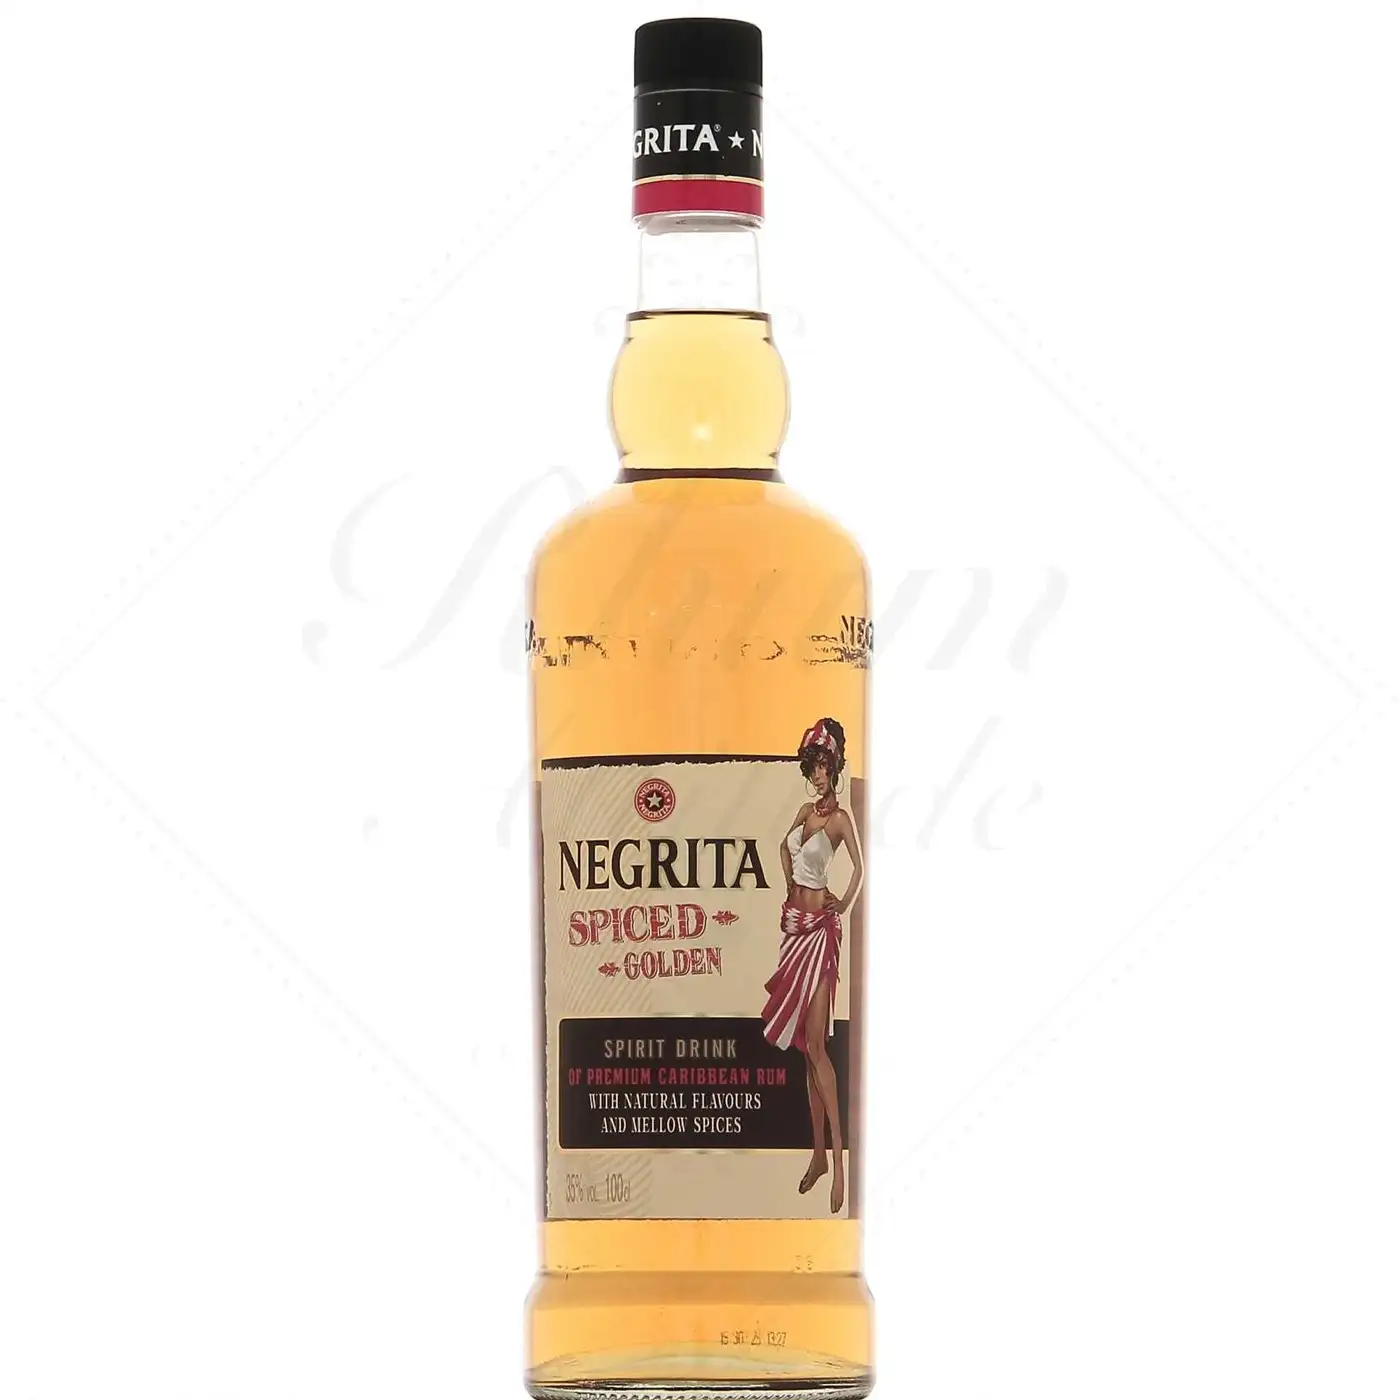 Image of the front of the bottle of the rum Rhum Negrita Spiced Golden